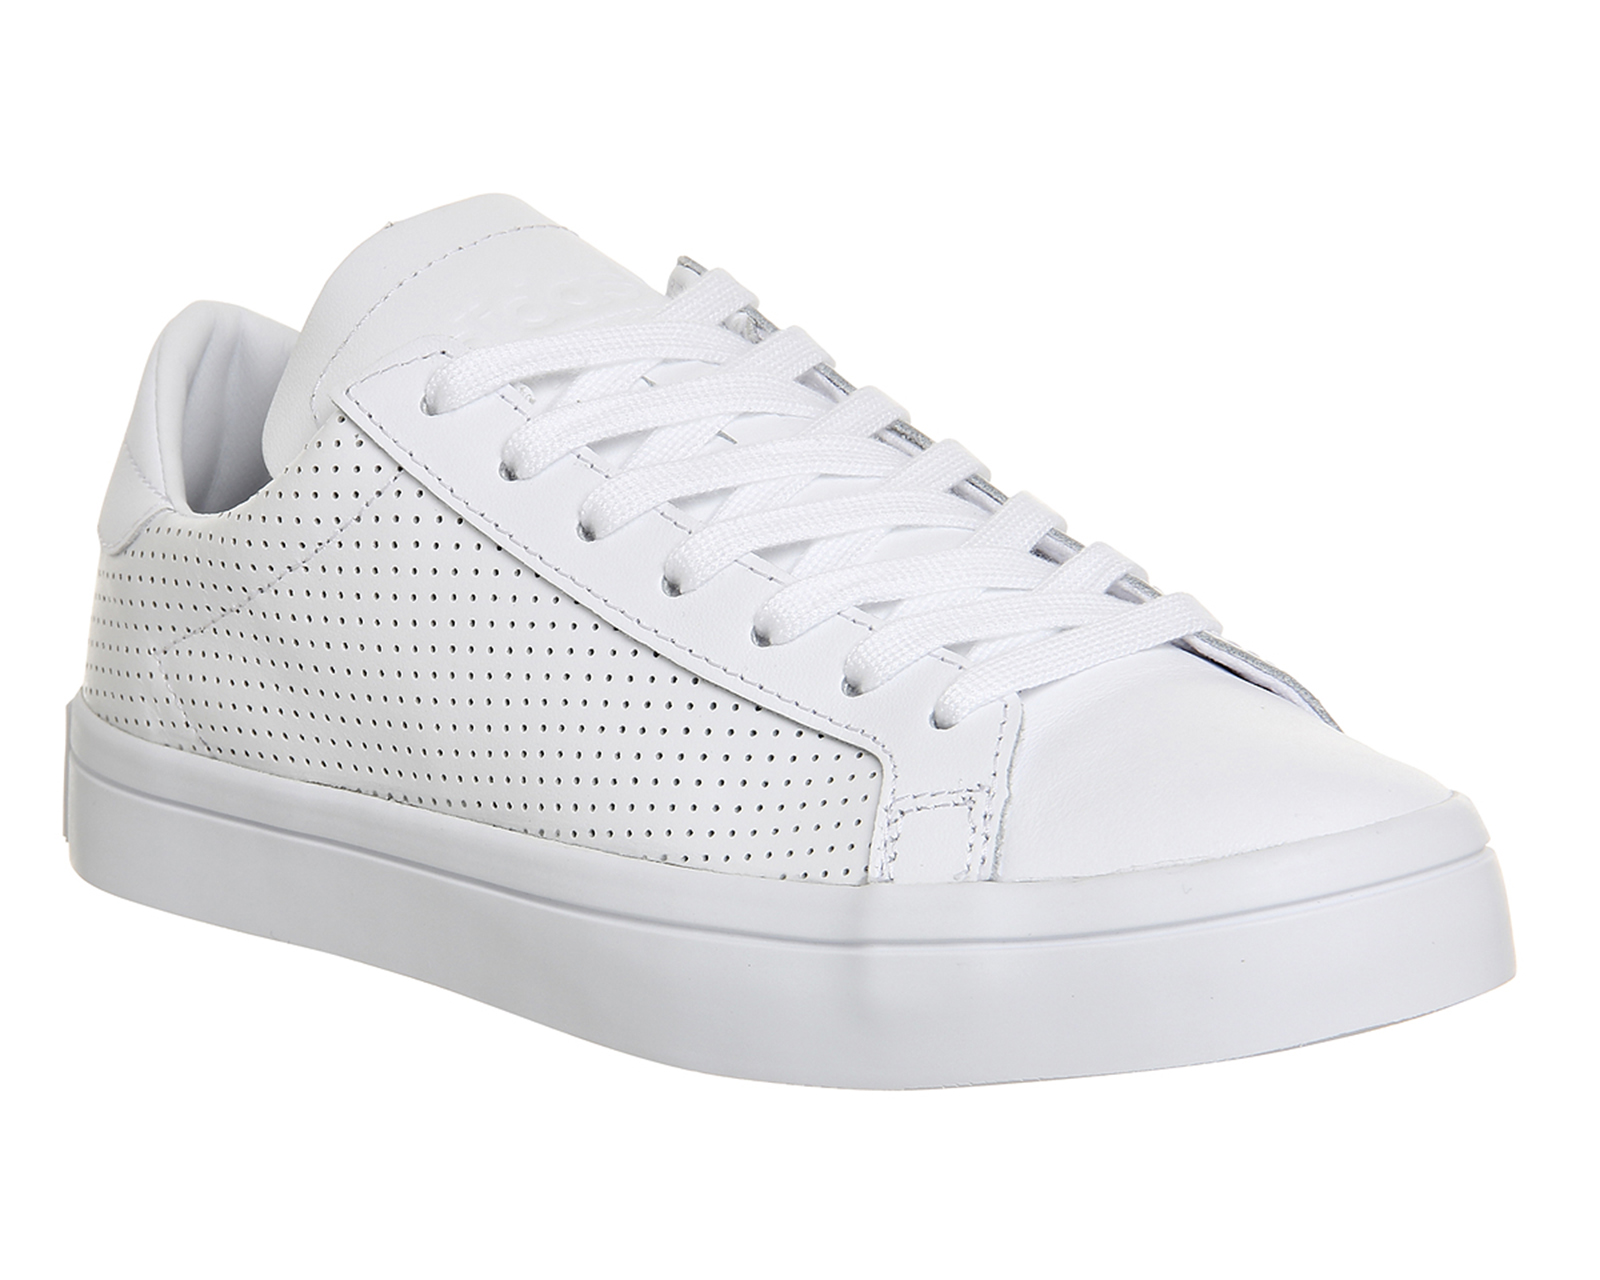 Caballero Meandro envío adidas Court Vantage White Perf - Women's Trainers